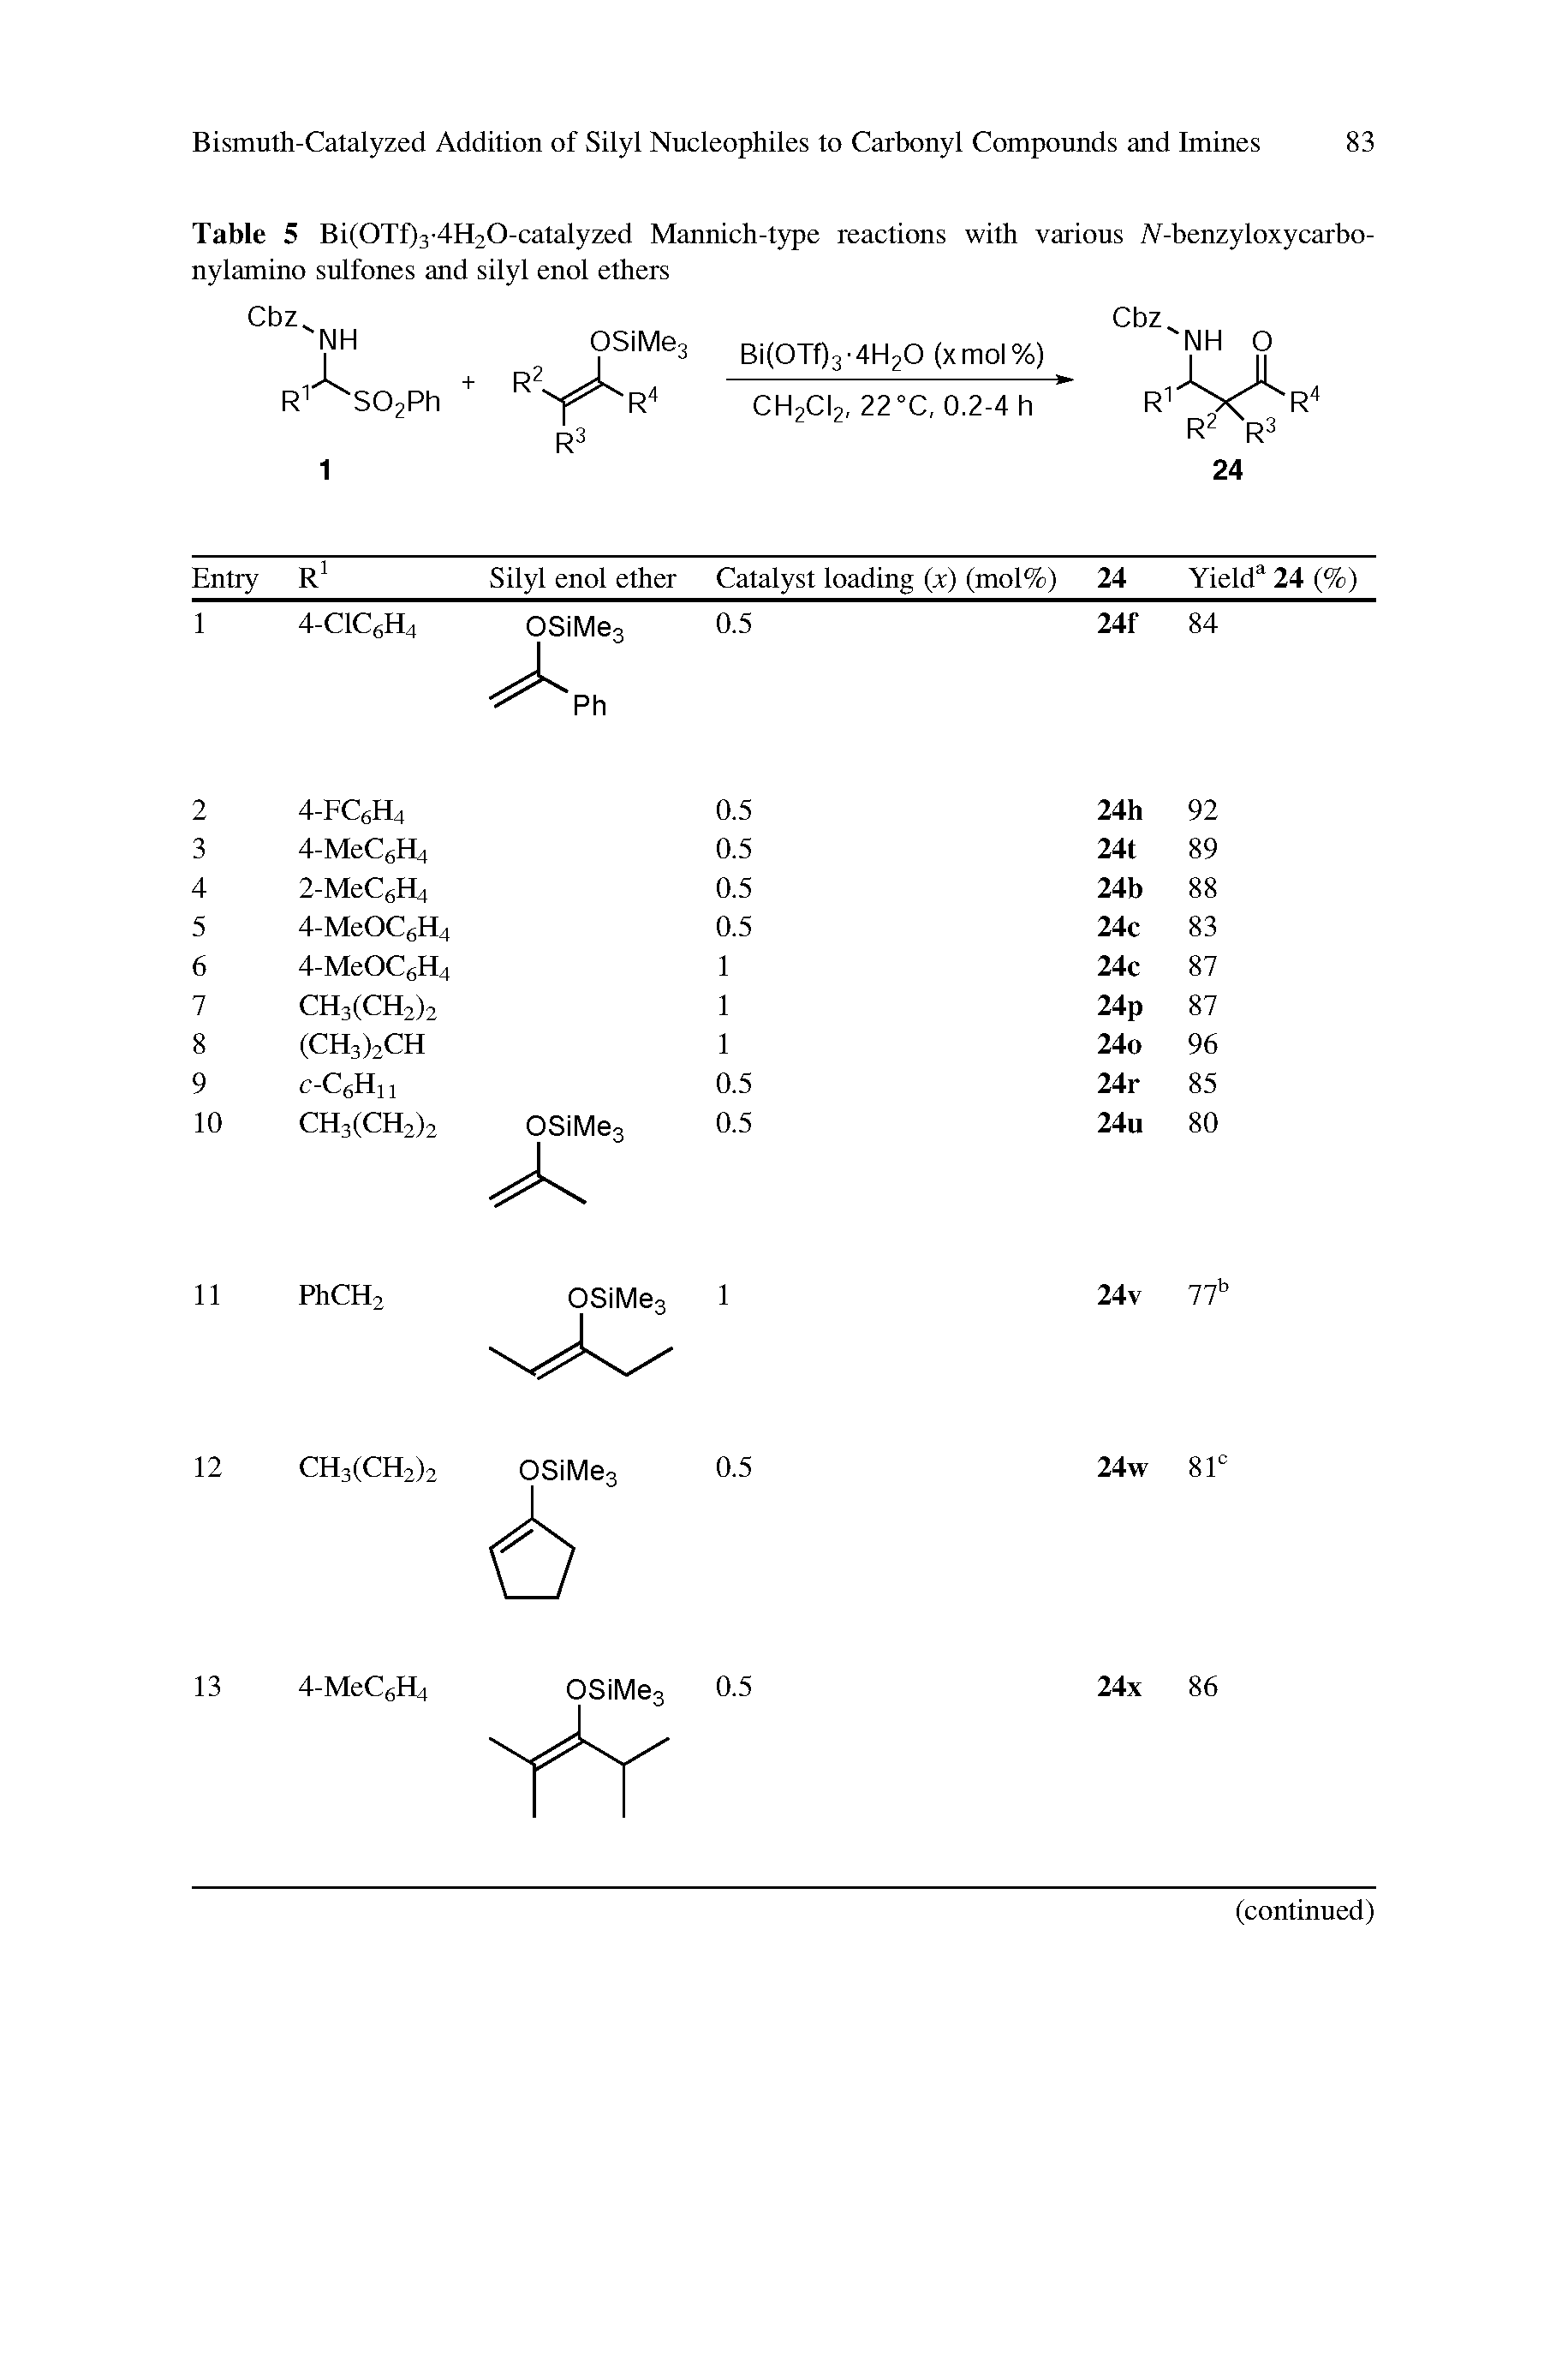 Table 5 Bi(0Tf)3-4H20-catalyzed Mannich-type reactions with various N-benzyloxycarbo-nylamino sulfones and silyl enol ethers...